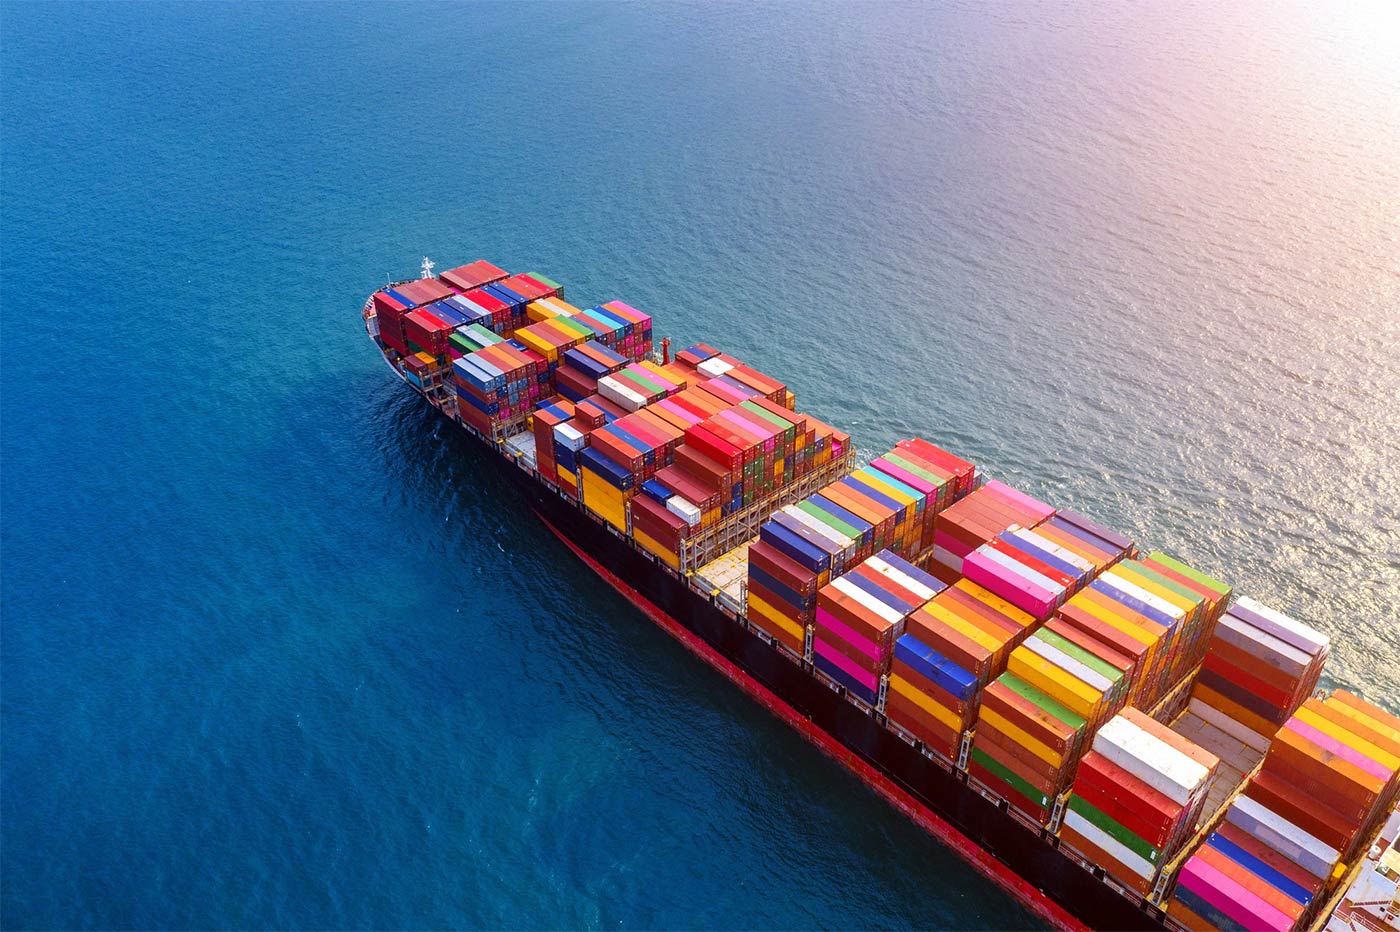 china supply chain shipping containers on a ship at sea